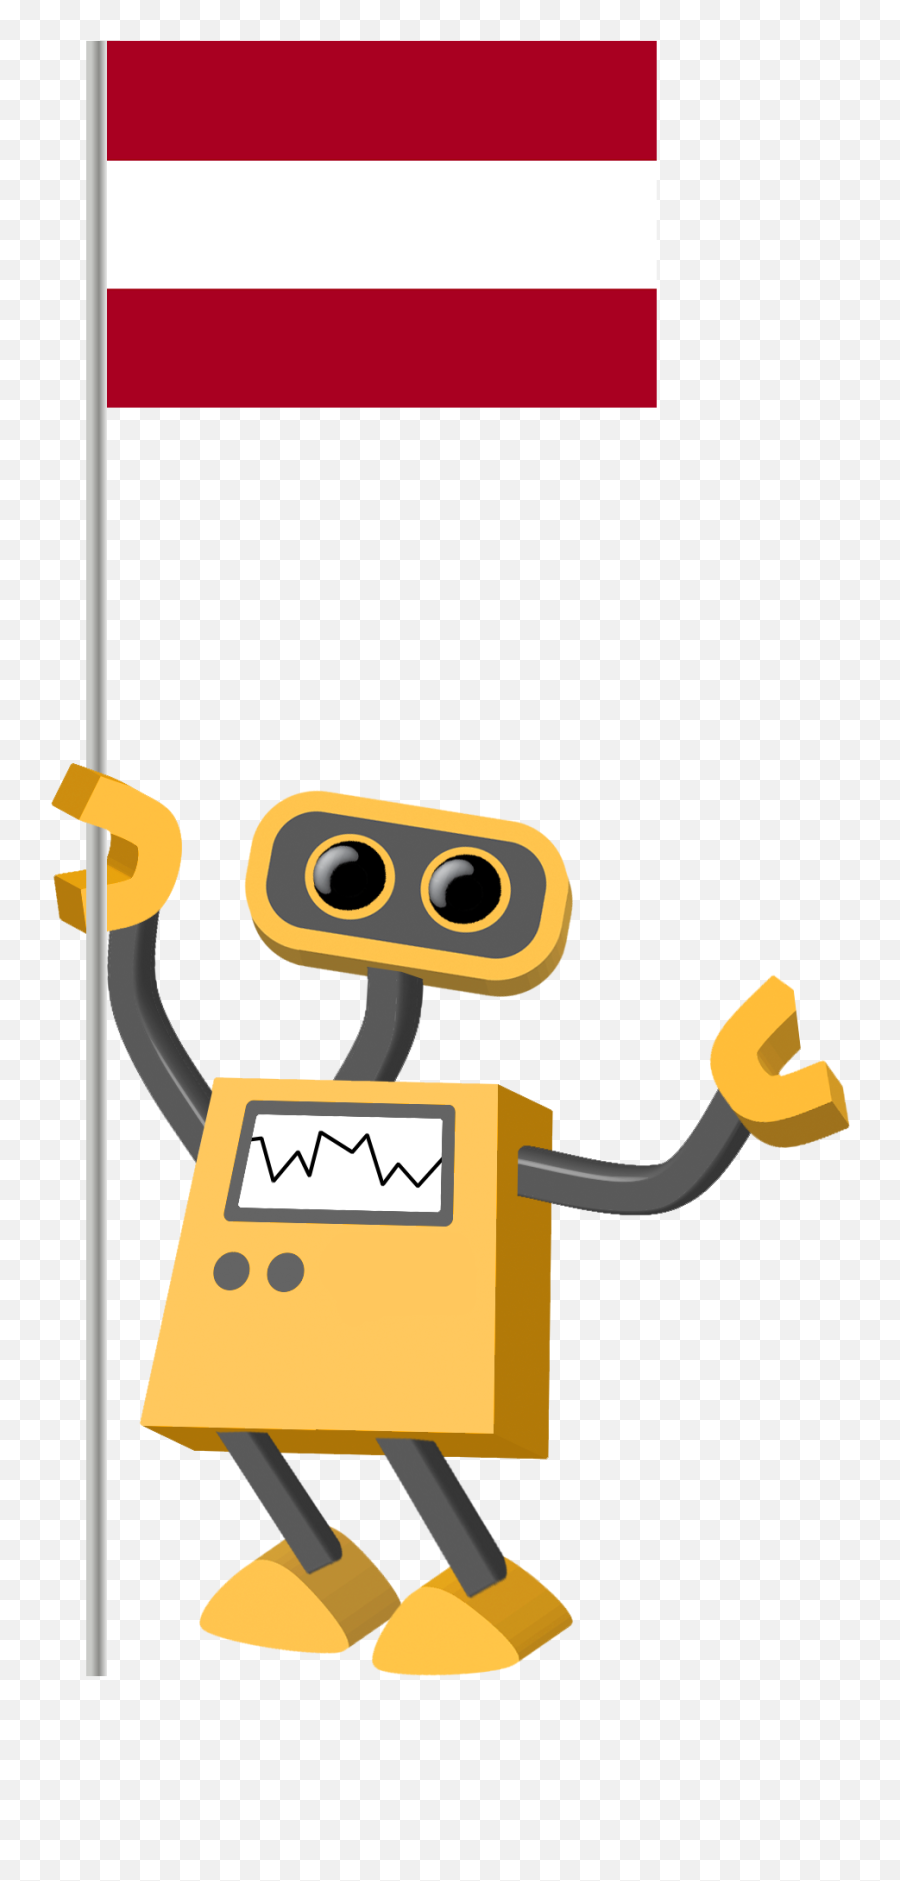 Download Hd All Robots In The Collection Have Transparent - Robot Albania Emoji,Transparent Backgrounds